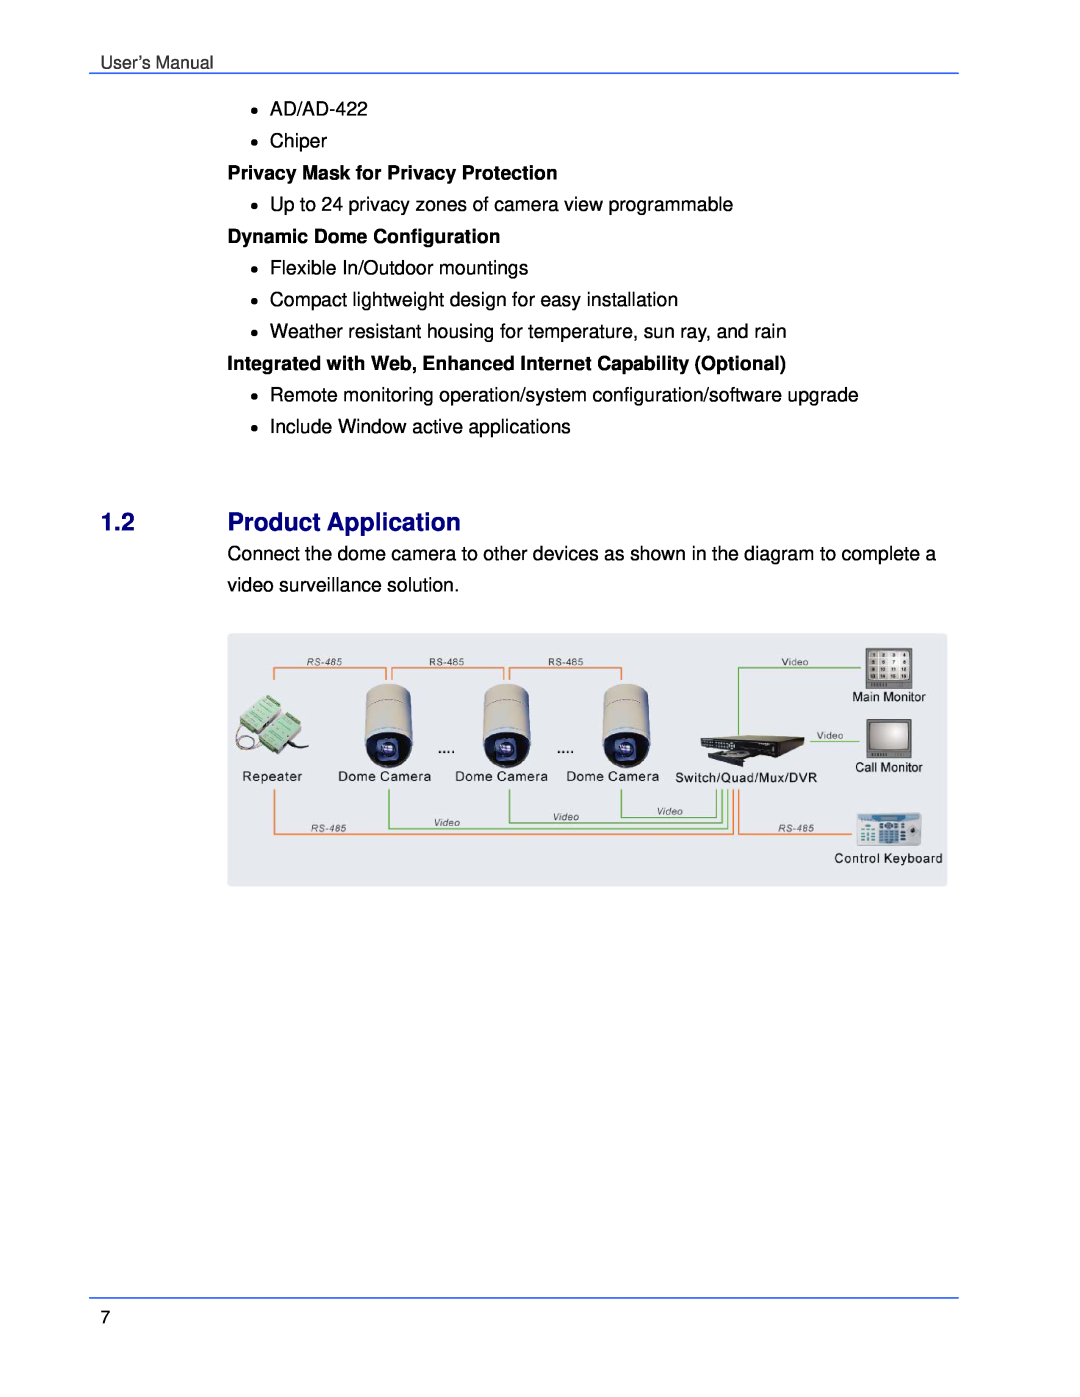 Elmo ESD-370 user manual Product Application, Privacy Mask for Privacy Protection, Dynamic Dome Configuration 